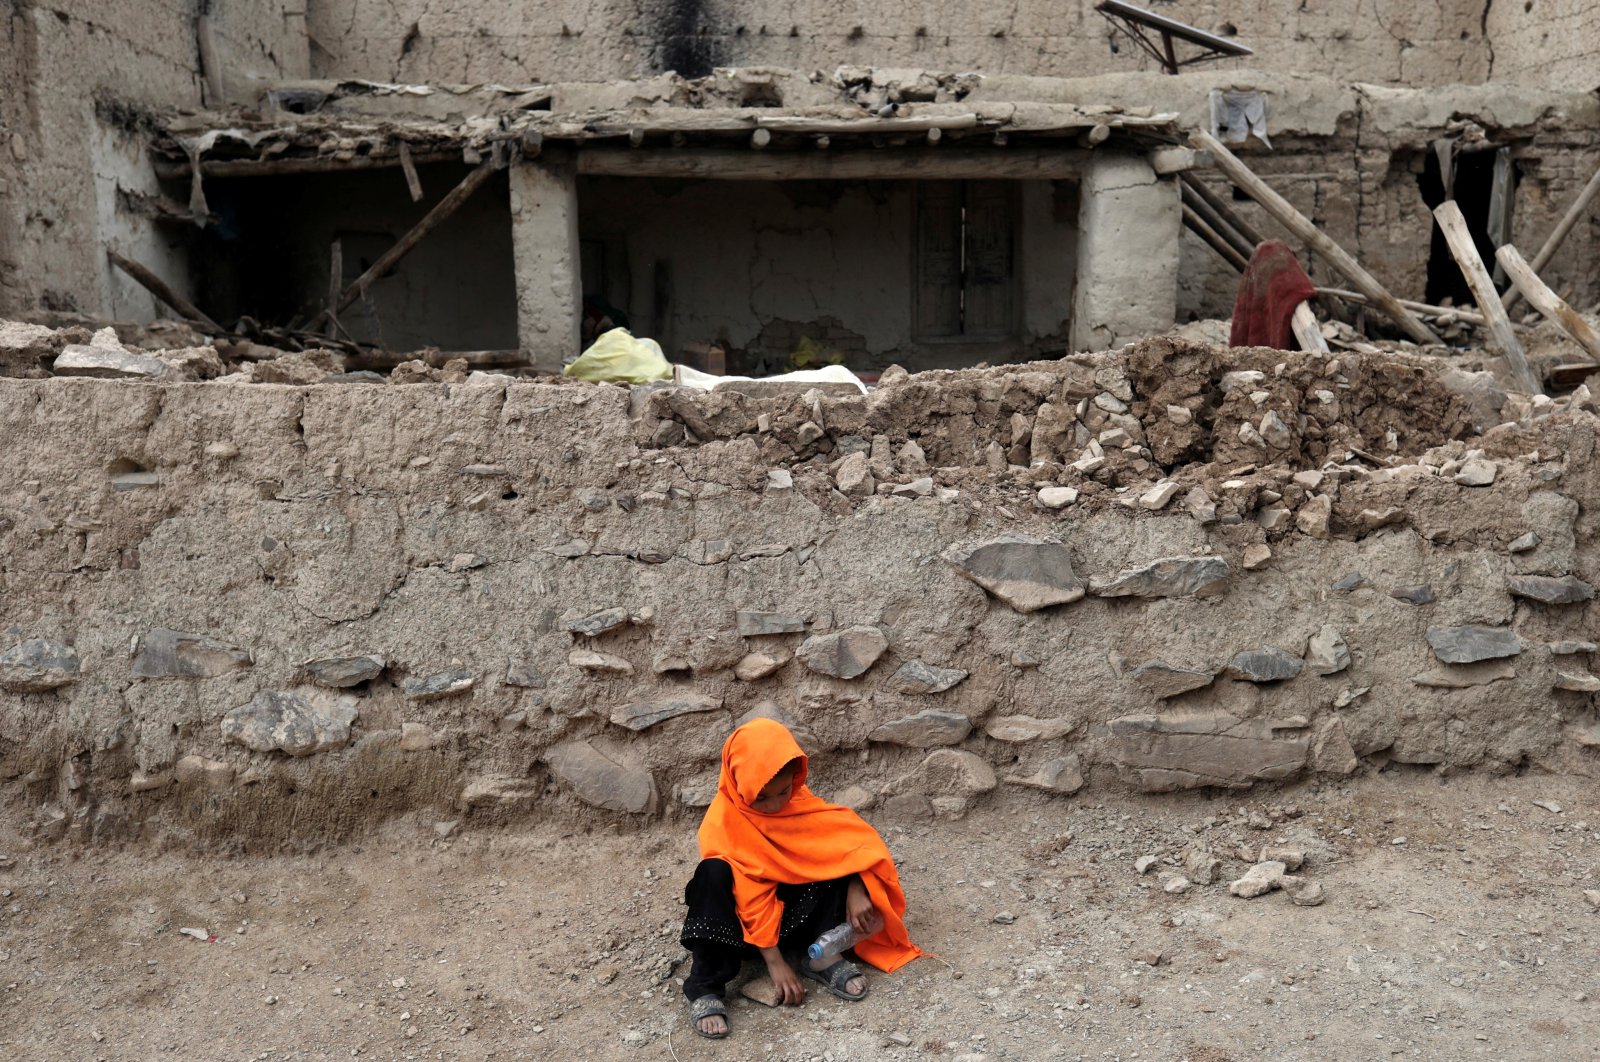 An Afghan girl sits in front of a house that was damaged by an earthquake in Gayan, Afghanistan, June 23, 2022. (Reuters Photo)